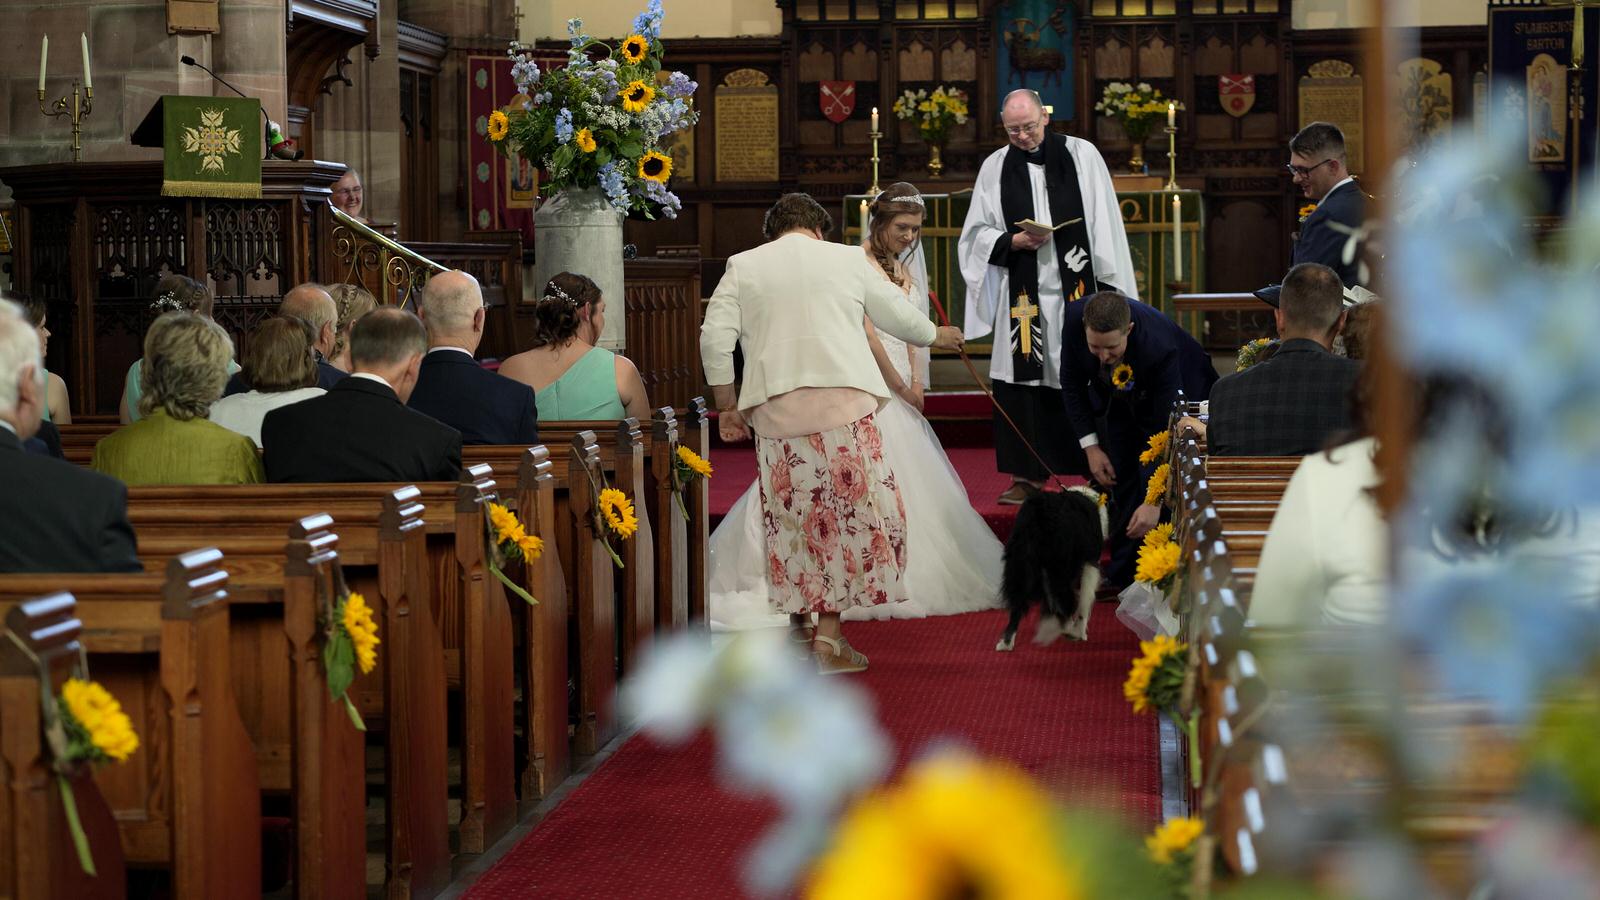 groom gets wedding rings from their dog in church